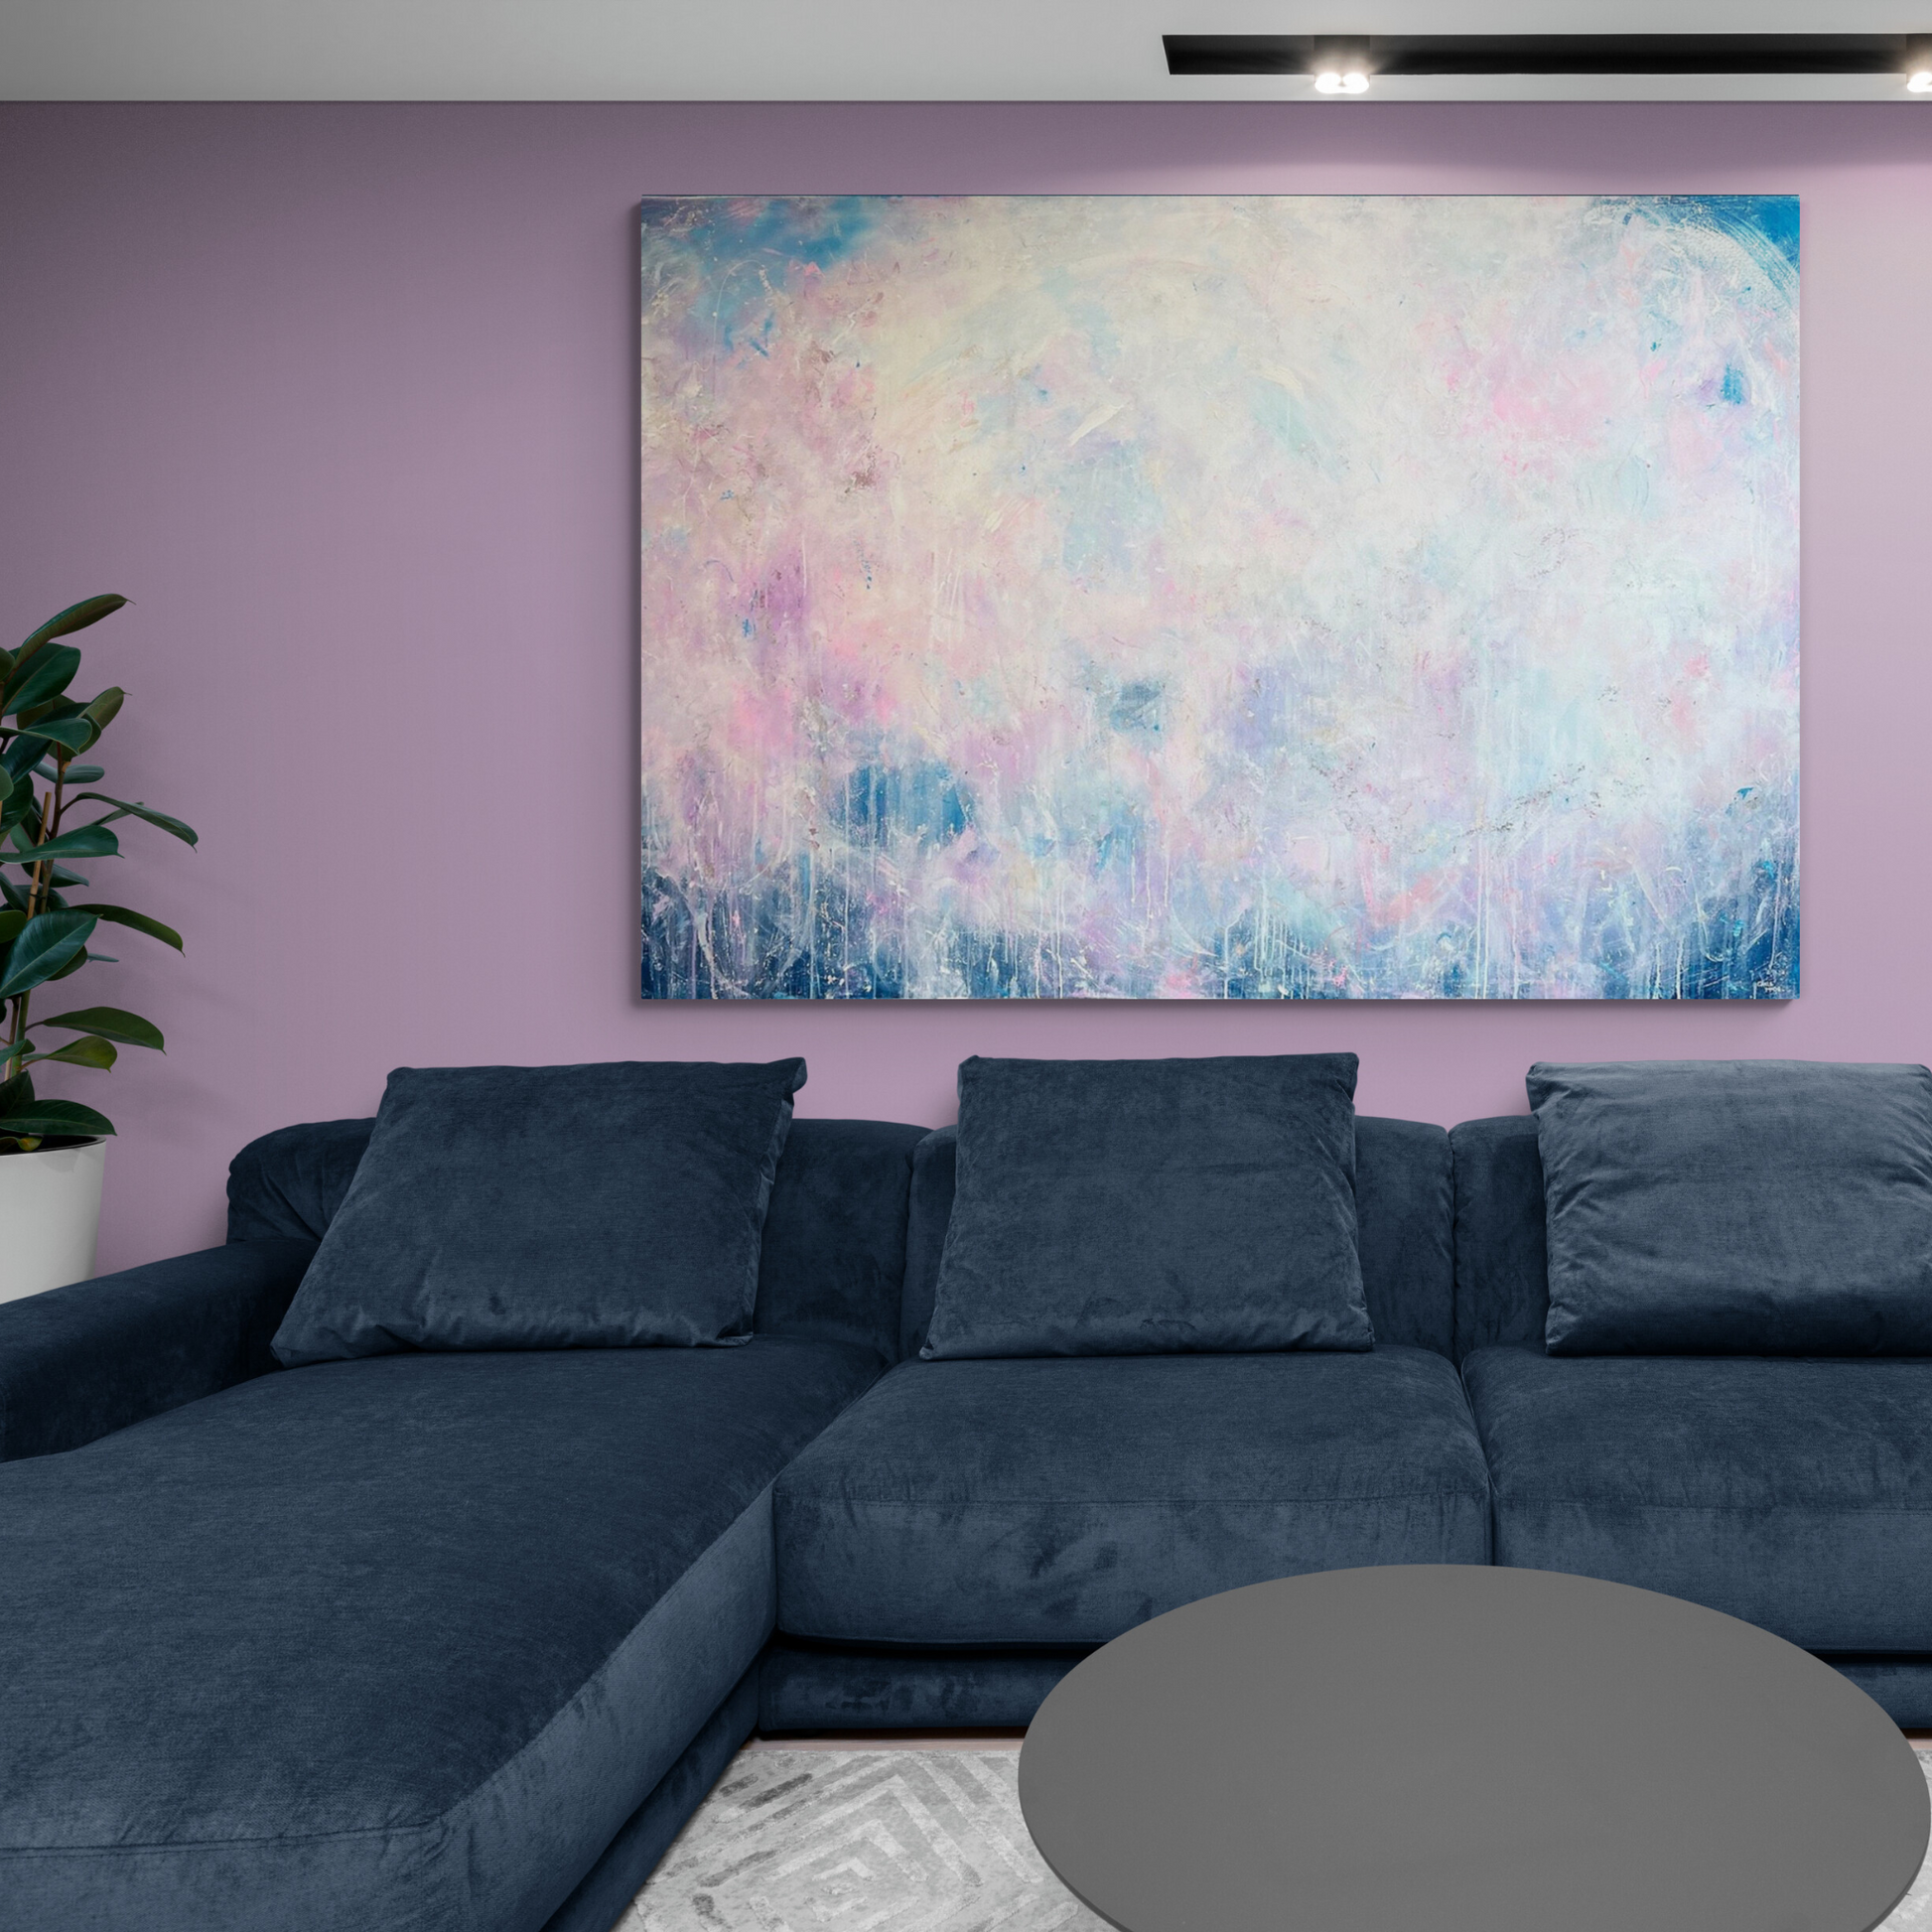 Large Painting For TV Room | Chels Made